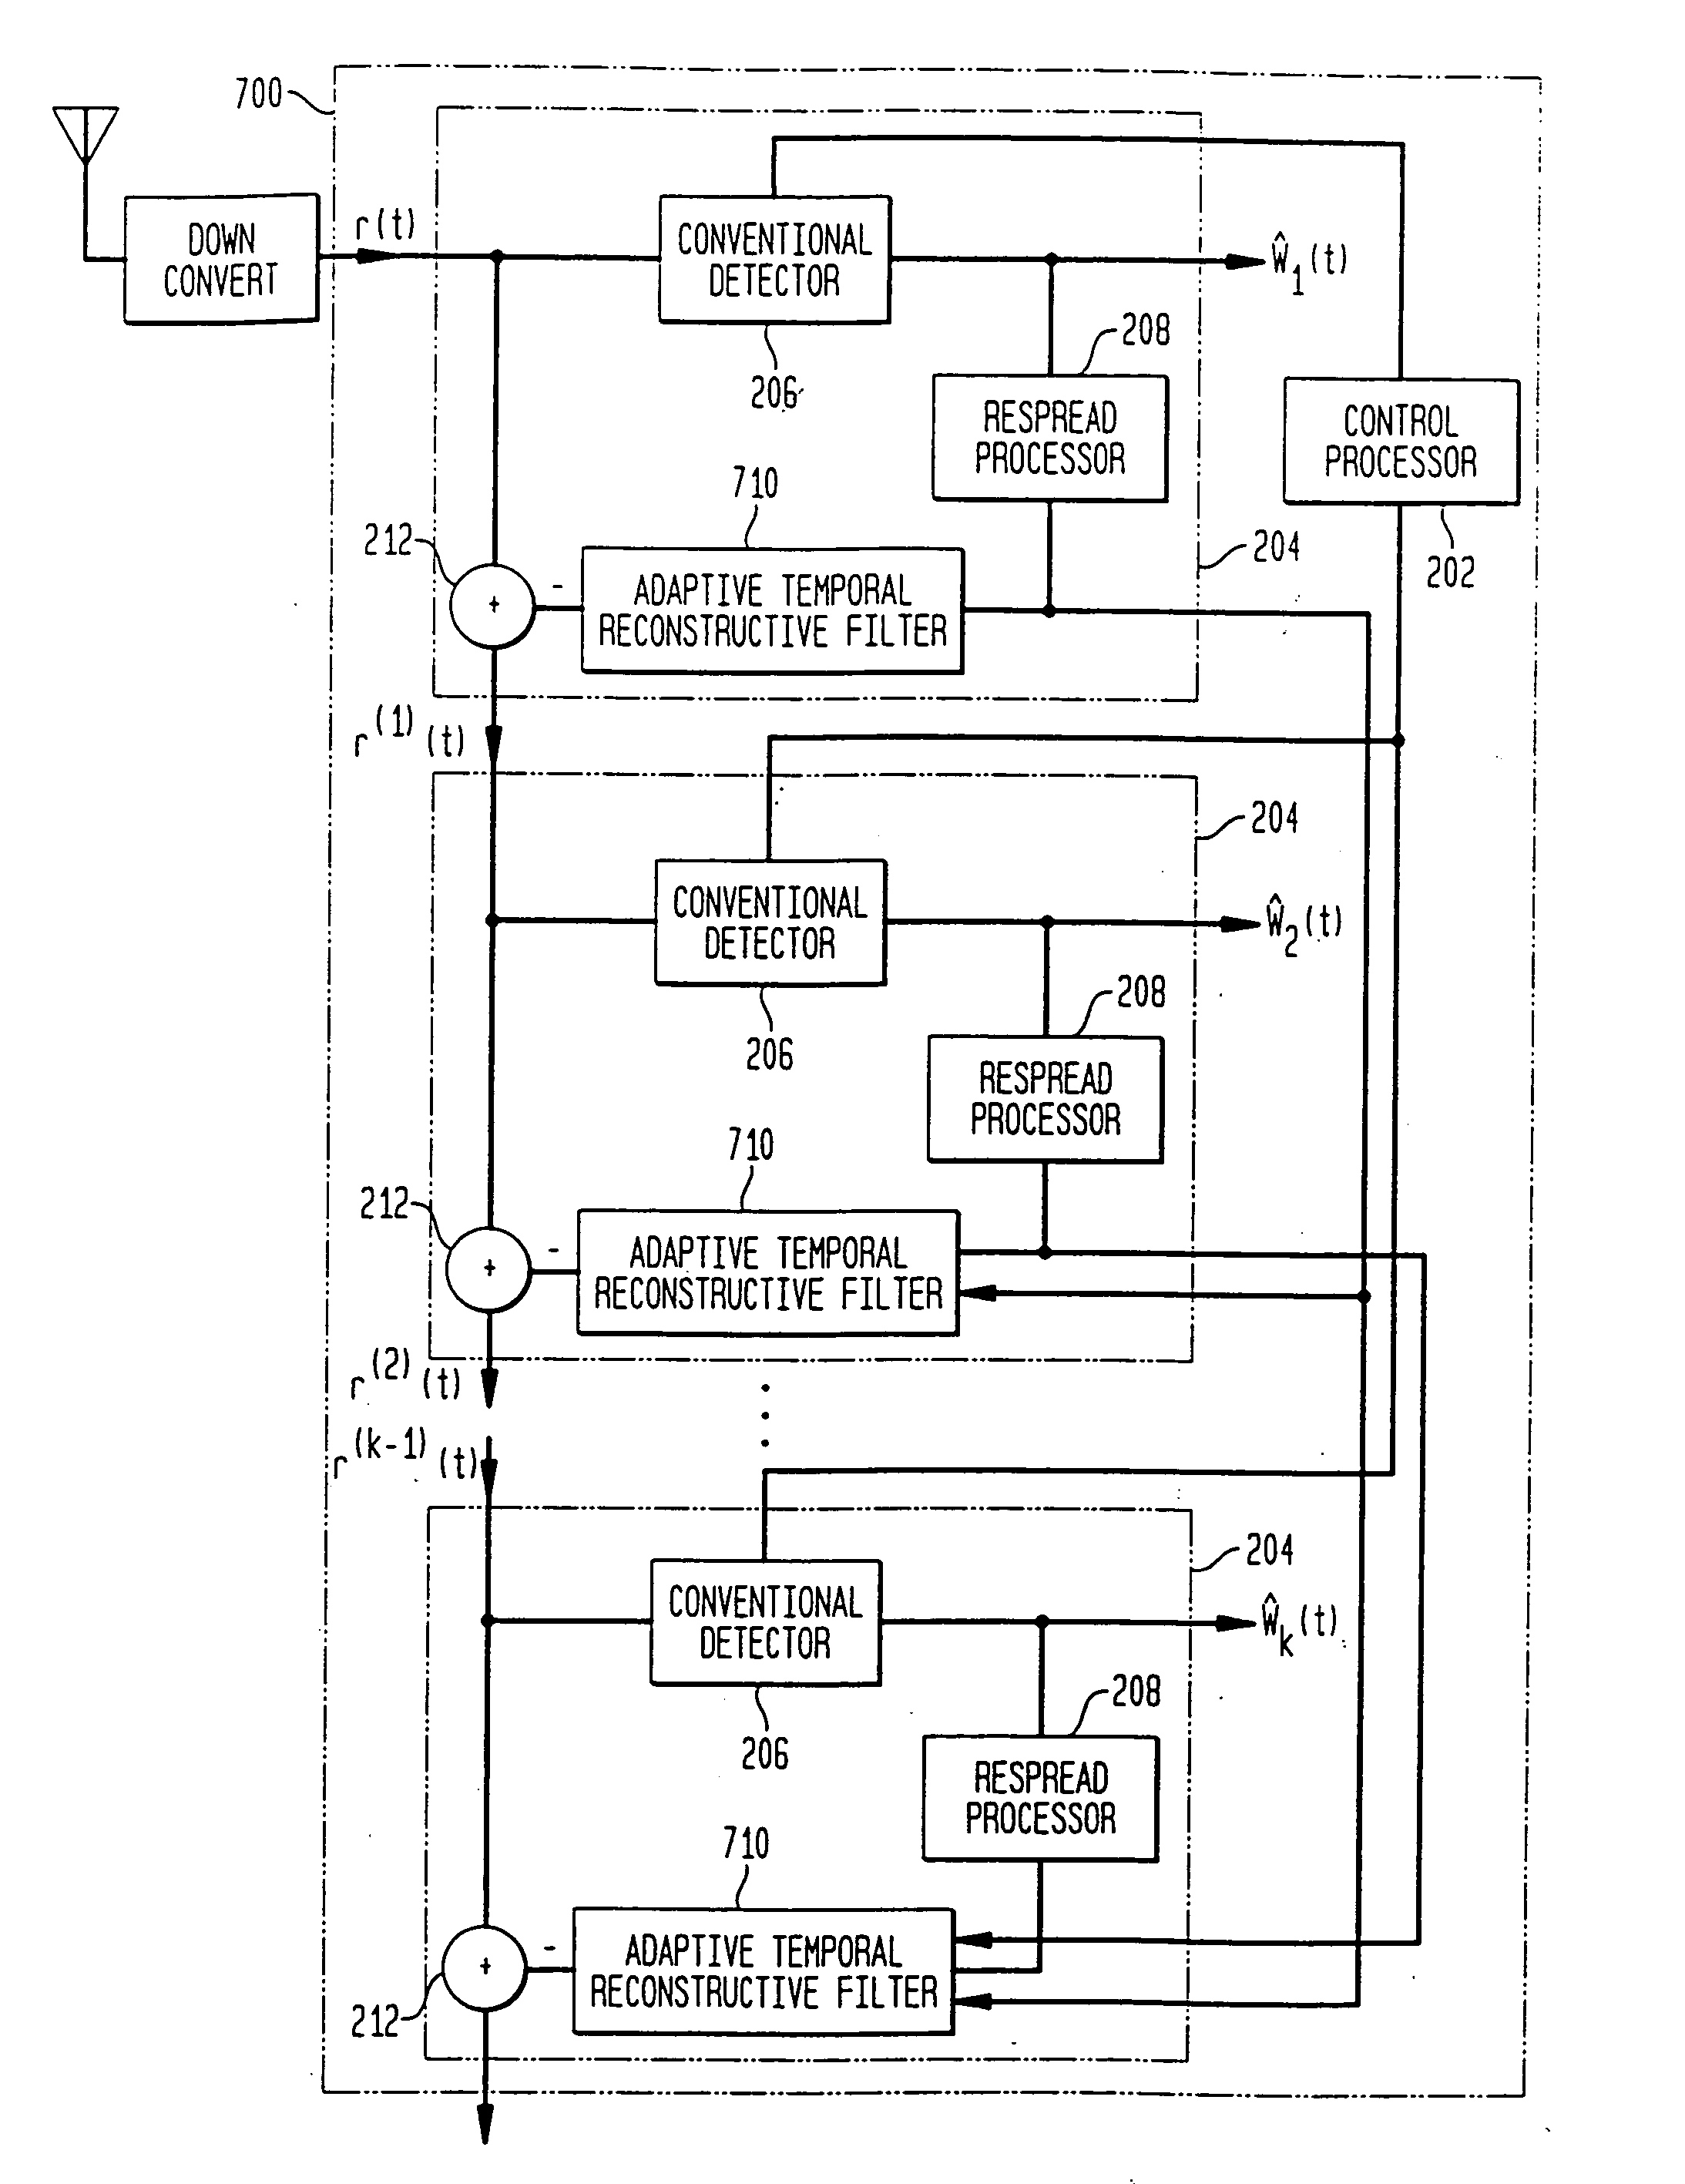 Parallel interference cancellation and minimum cost channel estimation